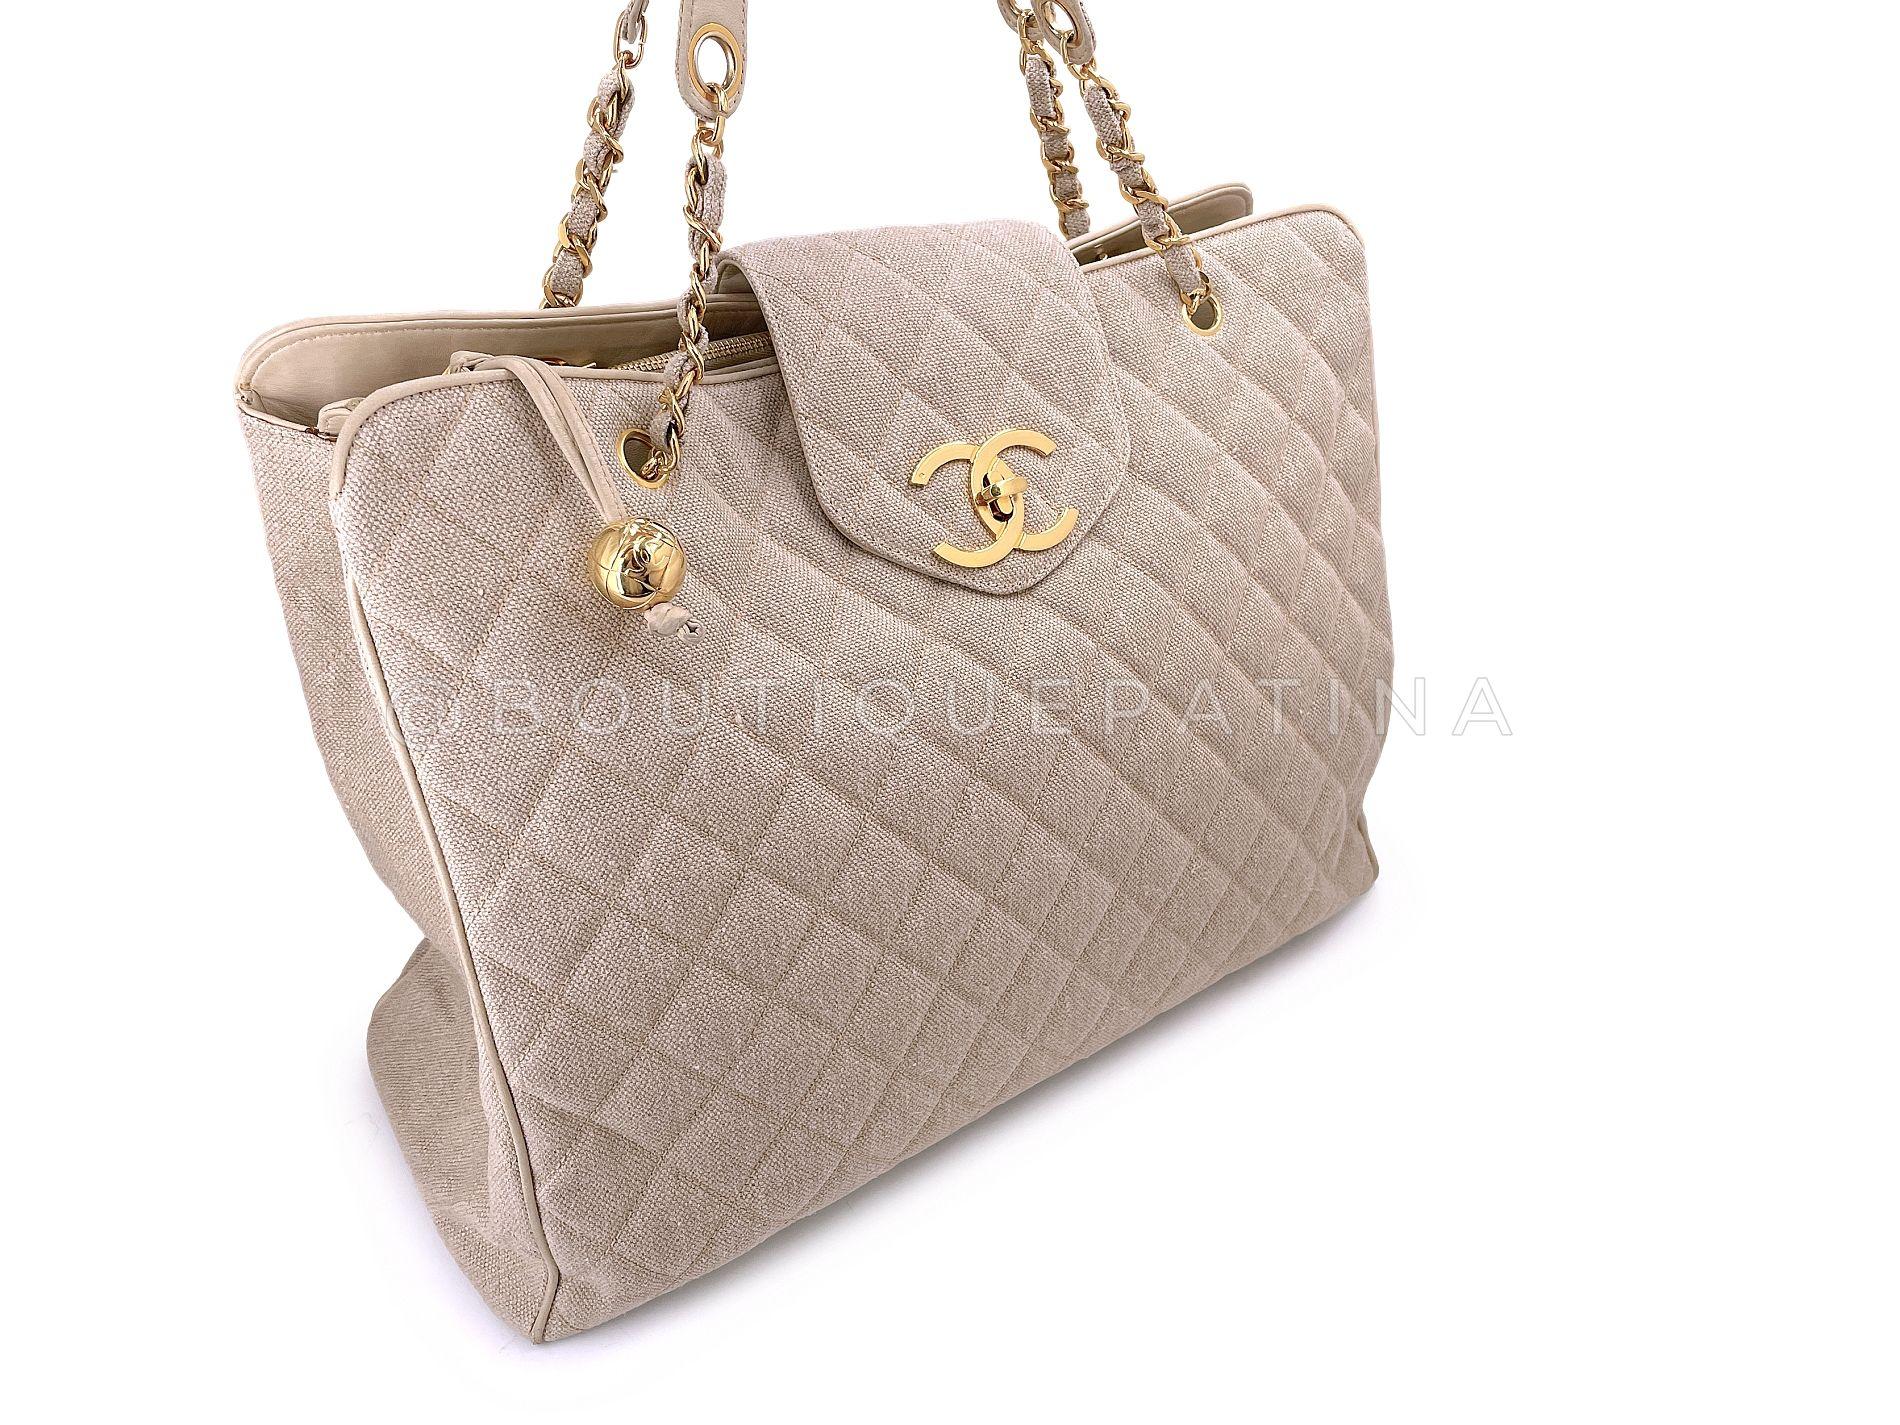 Store item: 68015
This Chanel Vintage Supermodel Taupe Beige Linen XL Weekender Tote Bag 24k GHW model is generally hard to find, but even harder in this material and color. Exquisitely Chanel vintage classic, this gorgeous weekender must not be